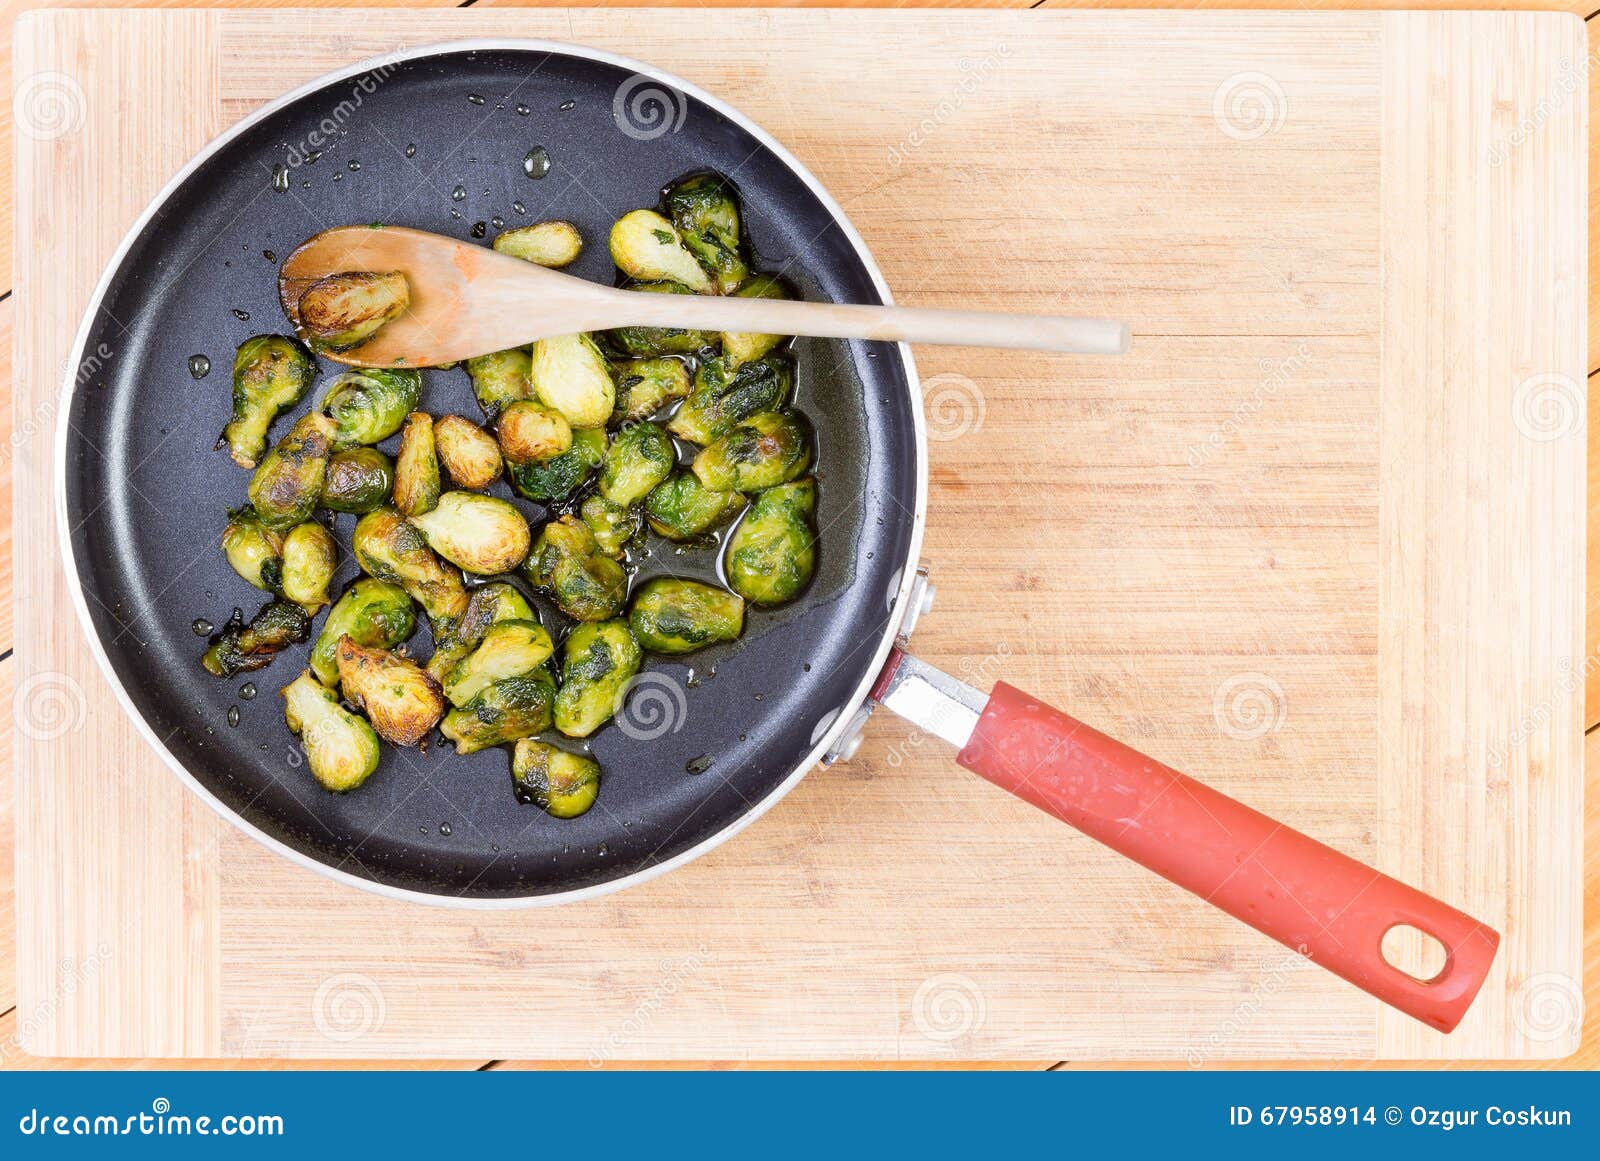 brussel sprouts cooked in non-stick pan